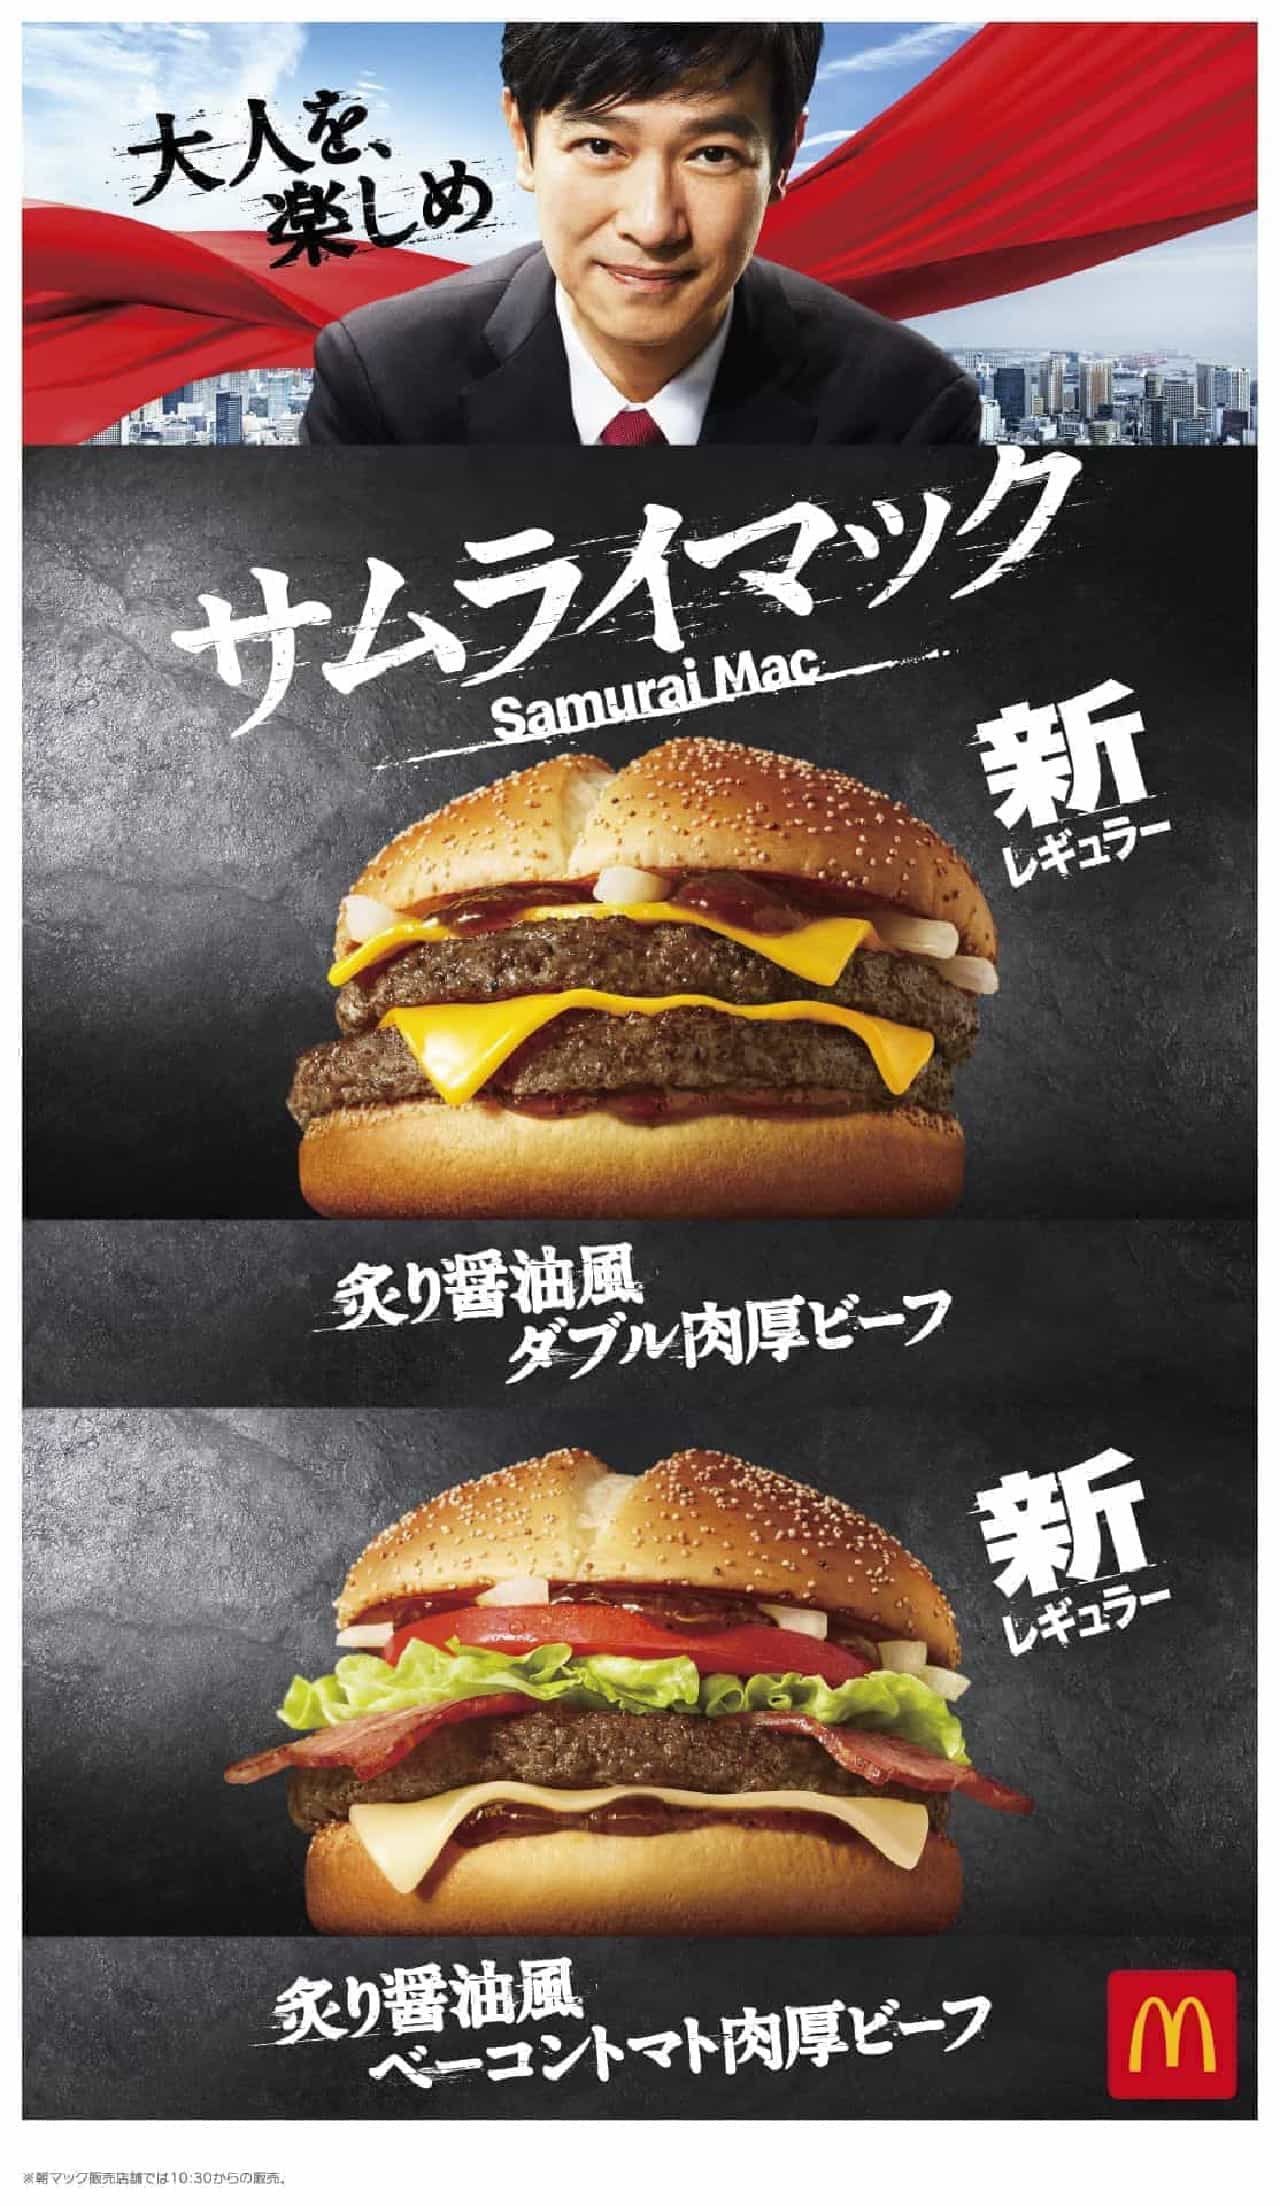 McDonald's "Grilled soy sauce-style double thick beef" "Grilled soy sauce-style bacon tomato thick beef"